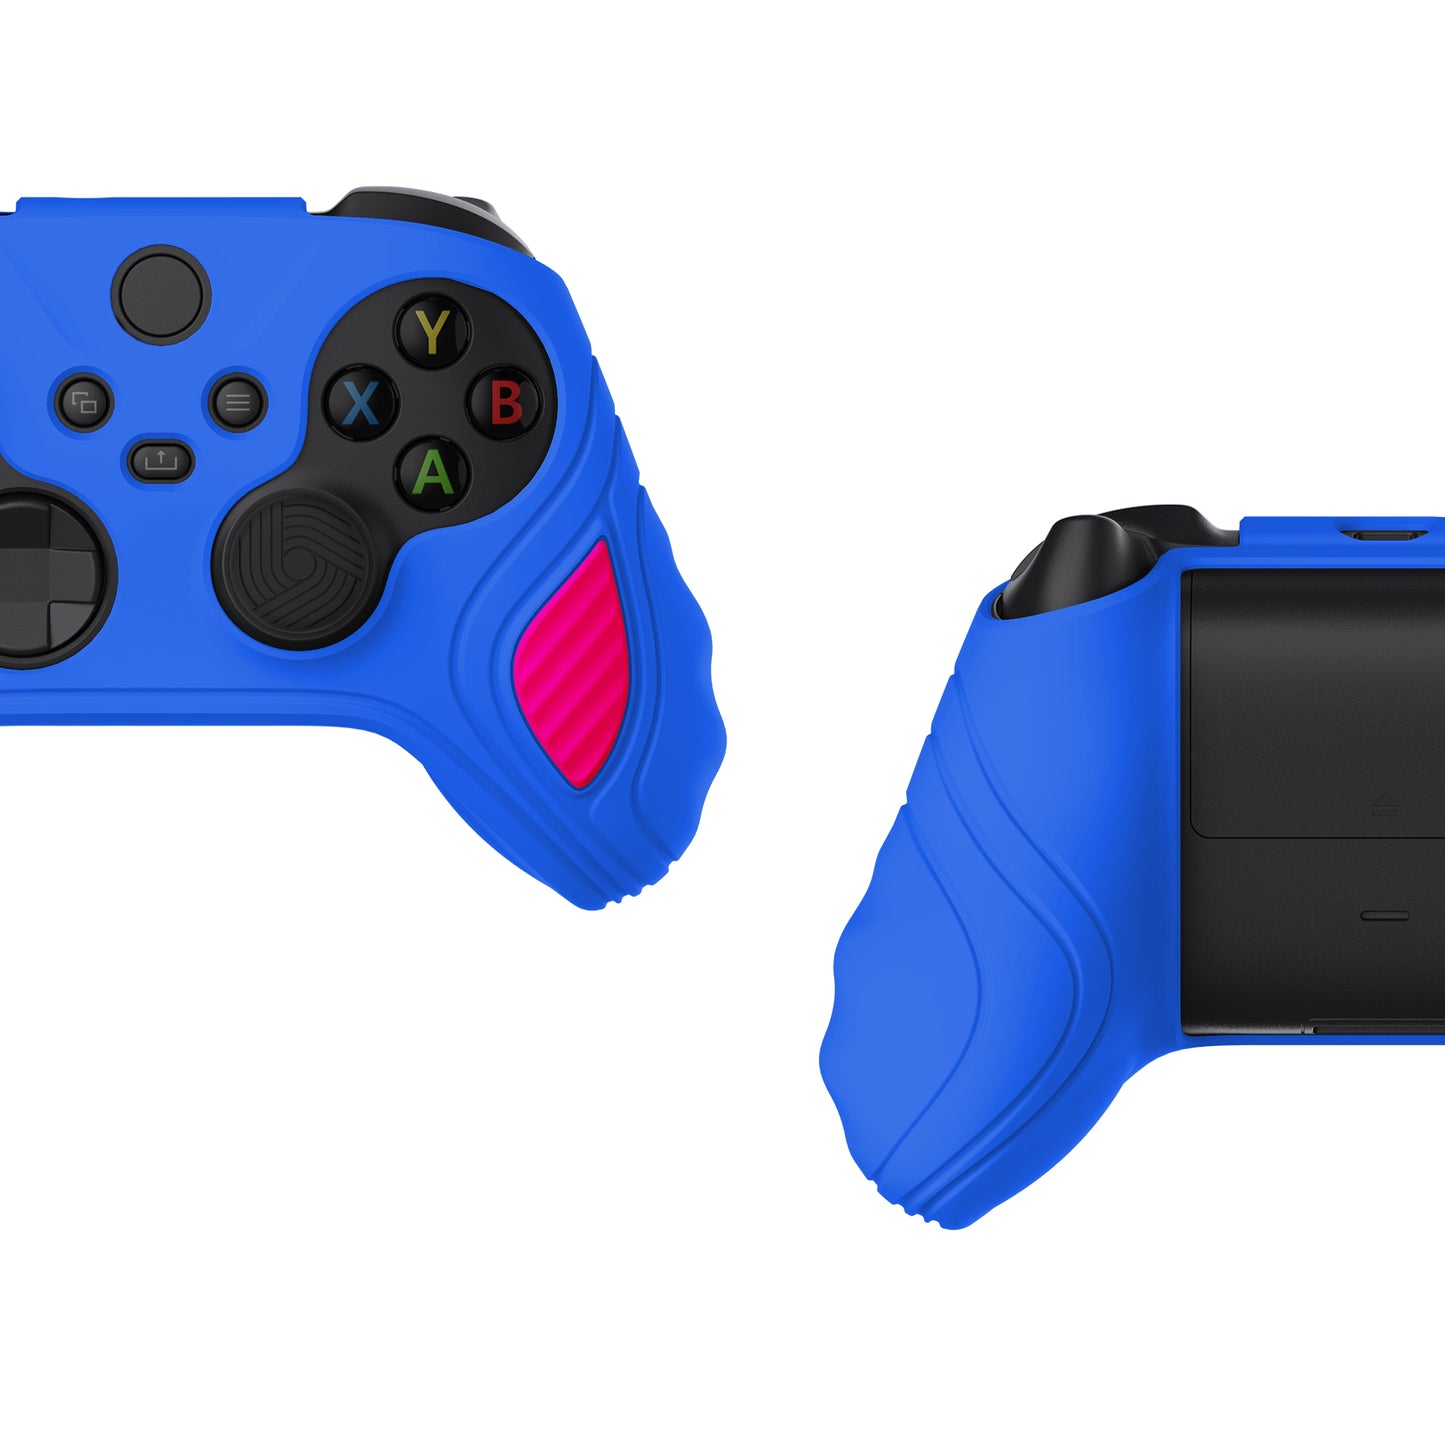 PlayVital Scorpion Edition Two-Tone Anti-Slip Silicone Case Cover for Xbox Series X/S Controller, Soft Rubber Case for Xbox Core Controller with Thumb Grip Caps - Primary Blue & Bright Pink -SPX3010 PlayVital